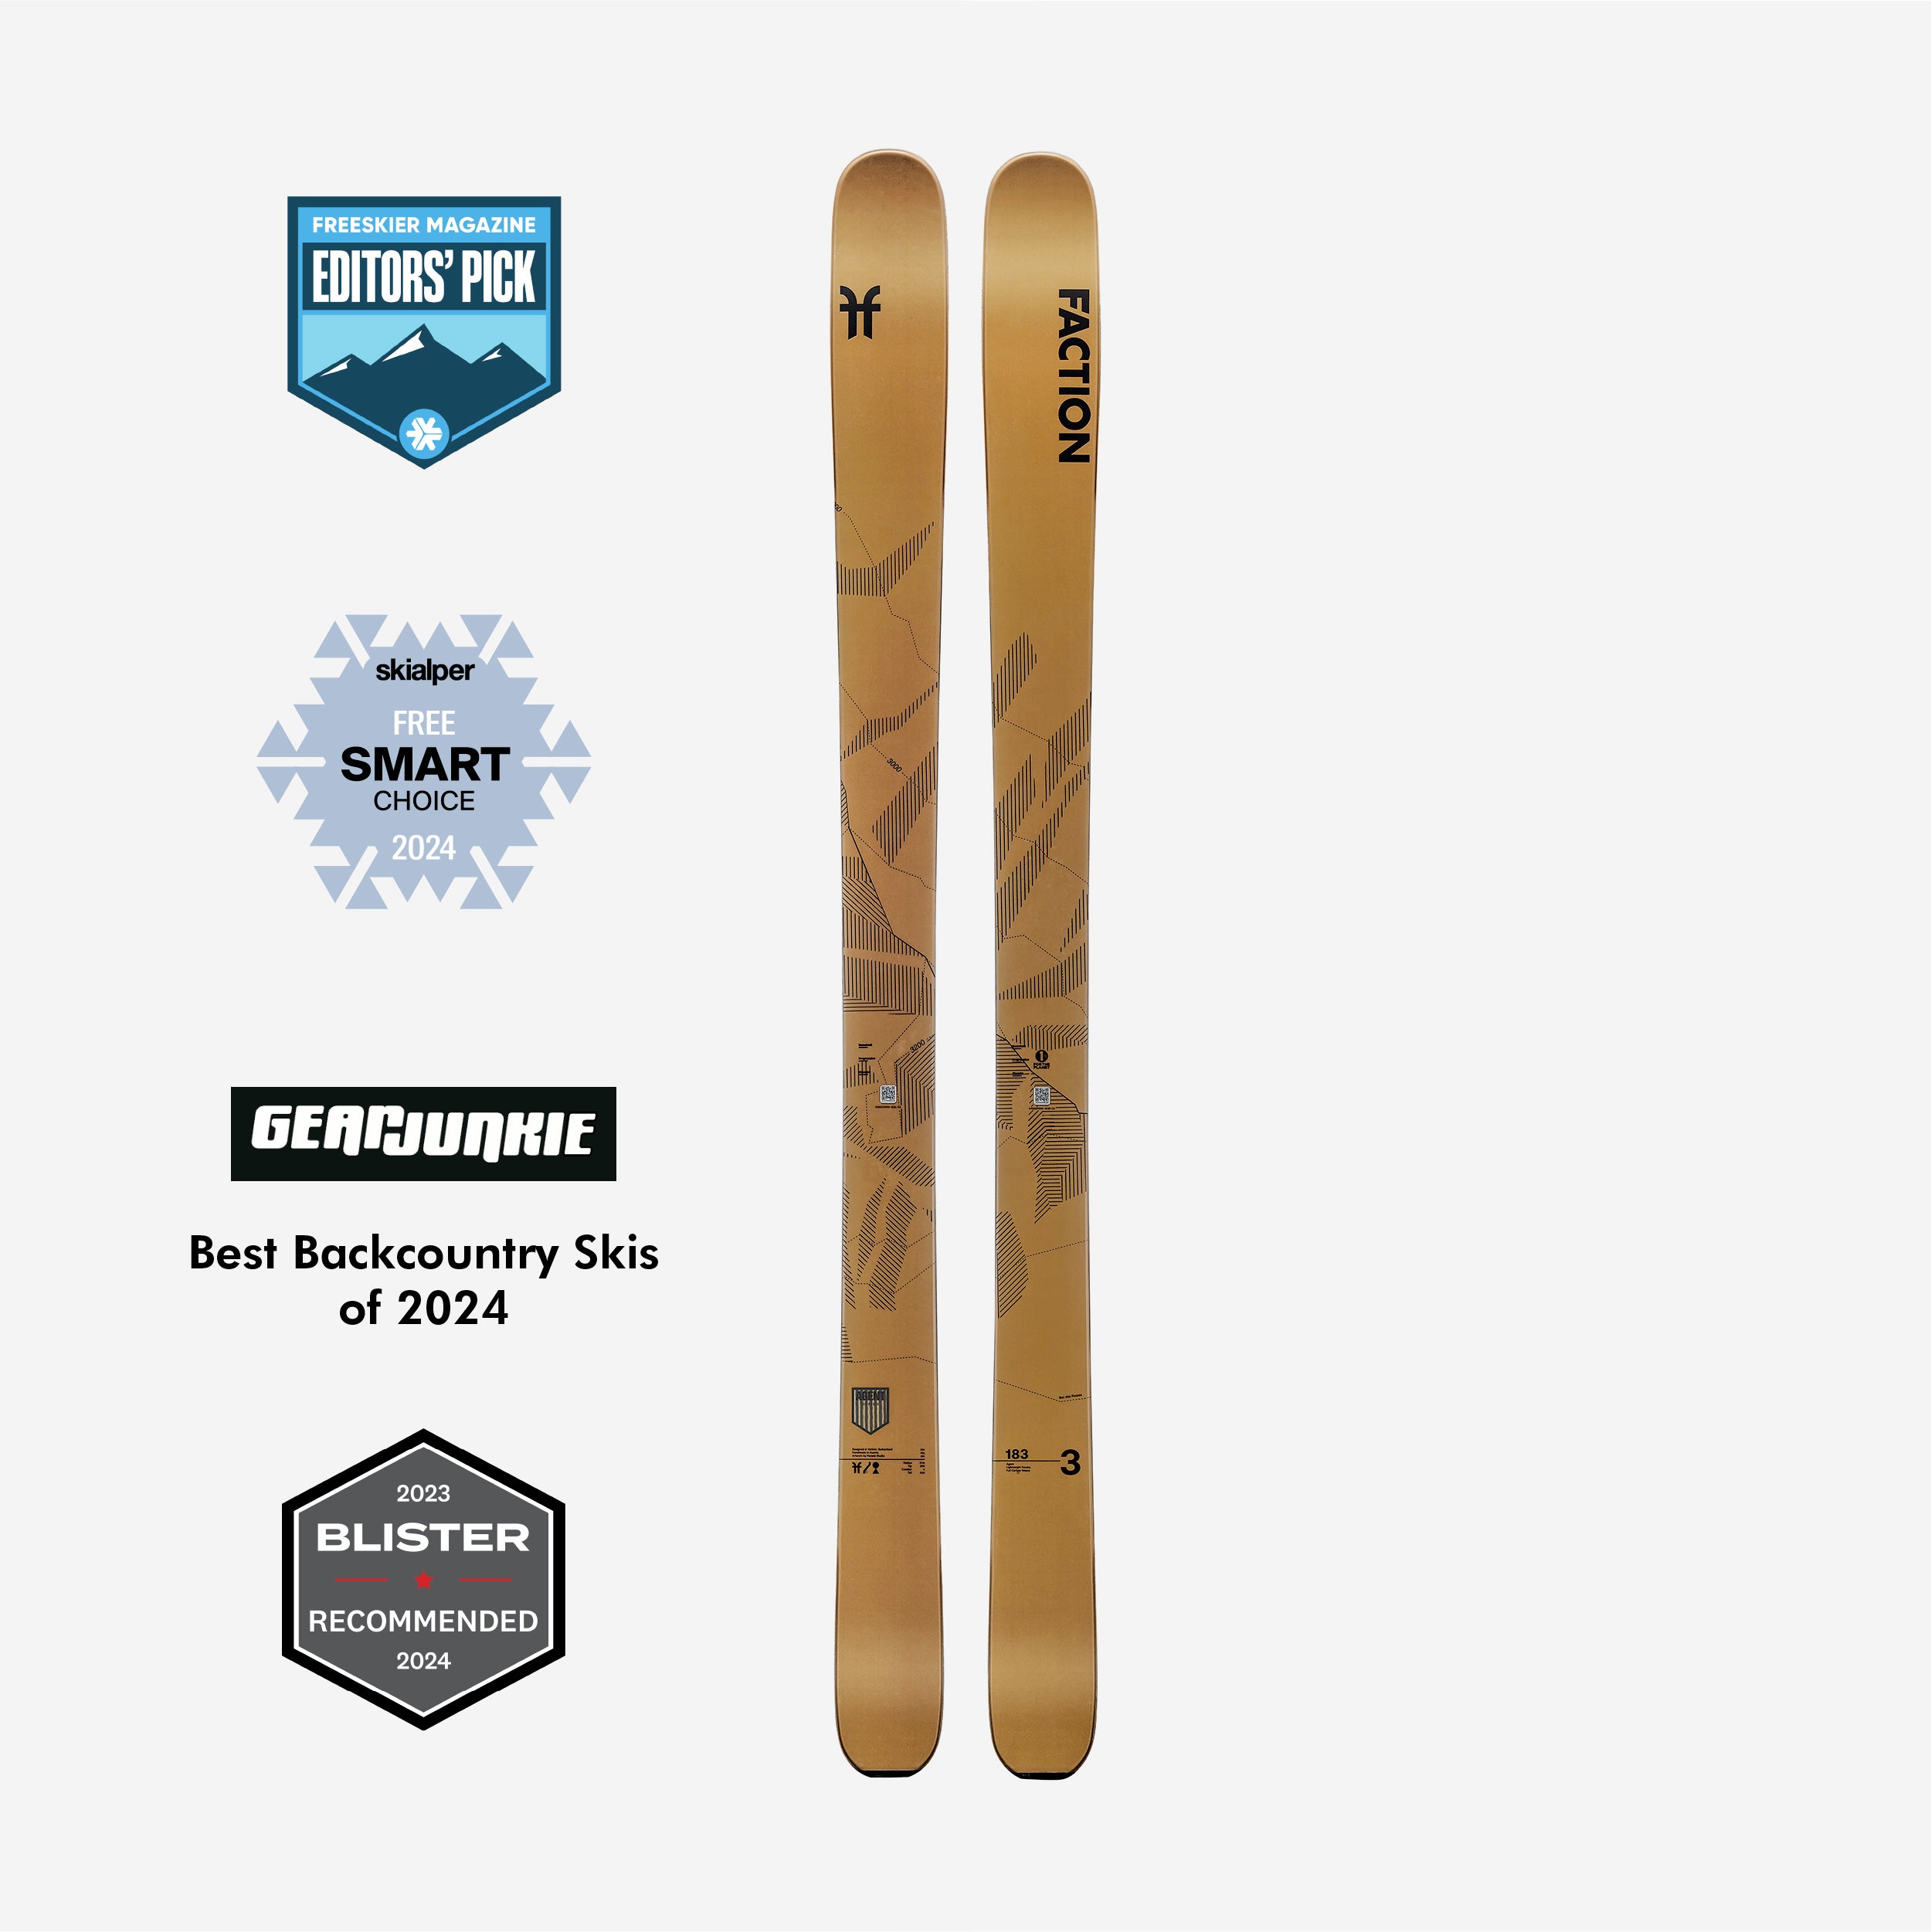 Our award-winning skis for 23